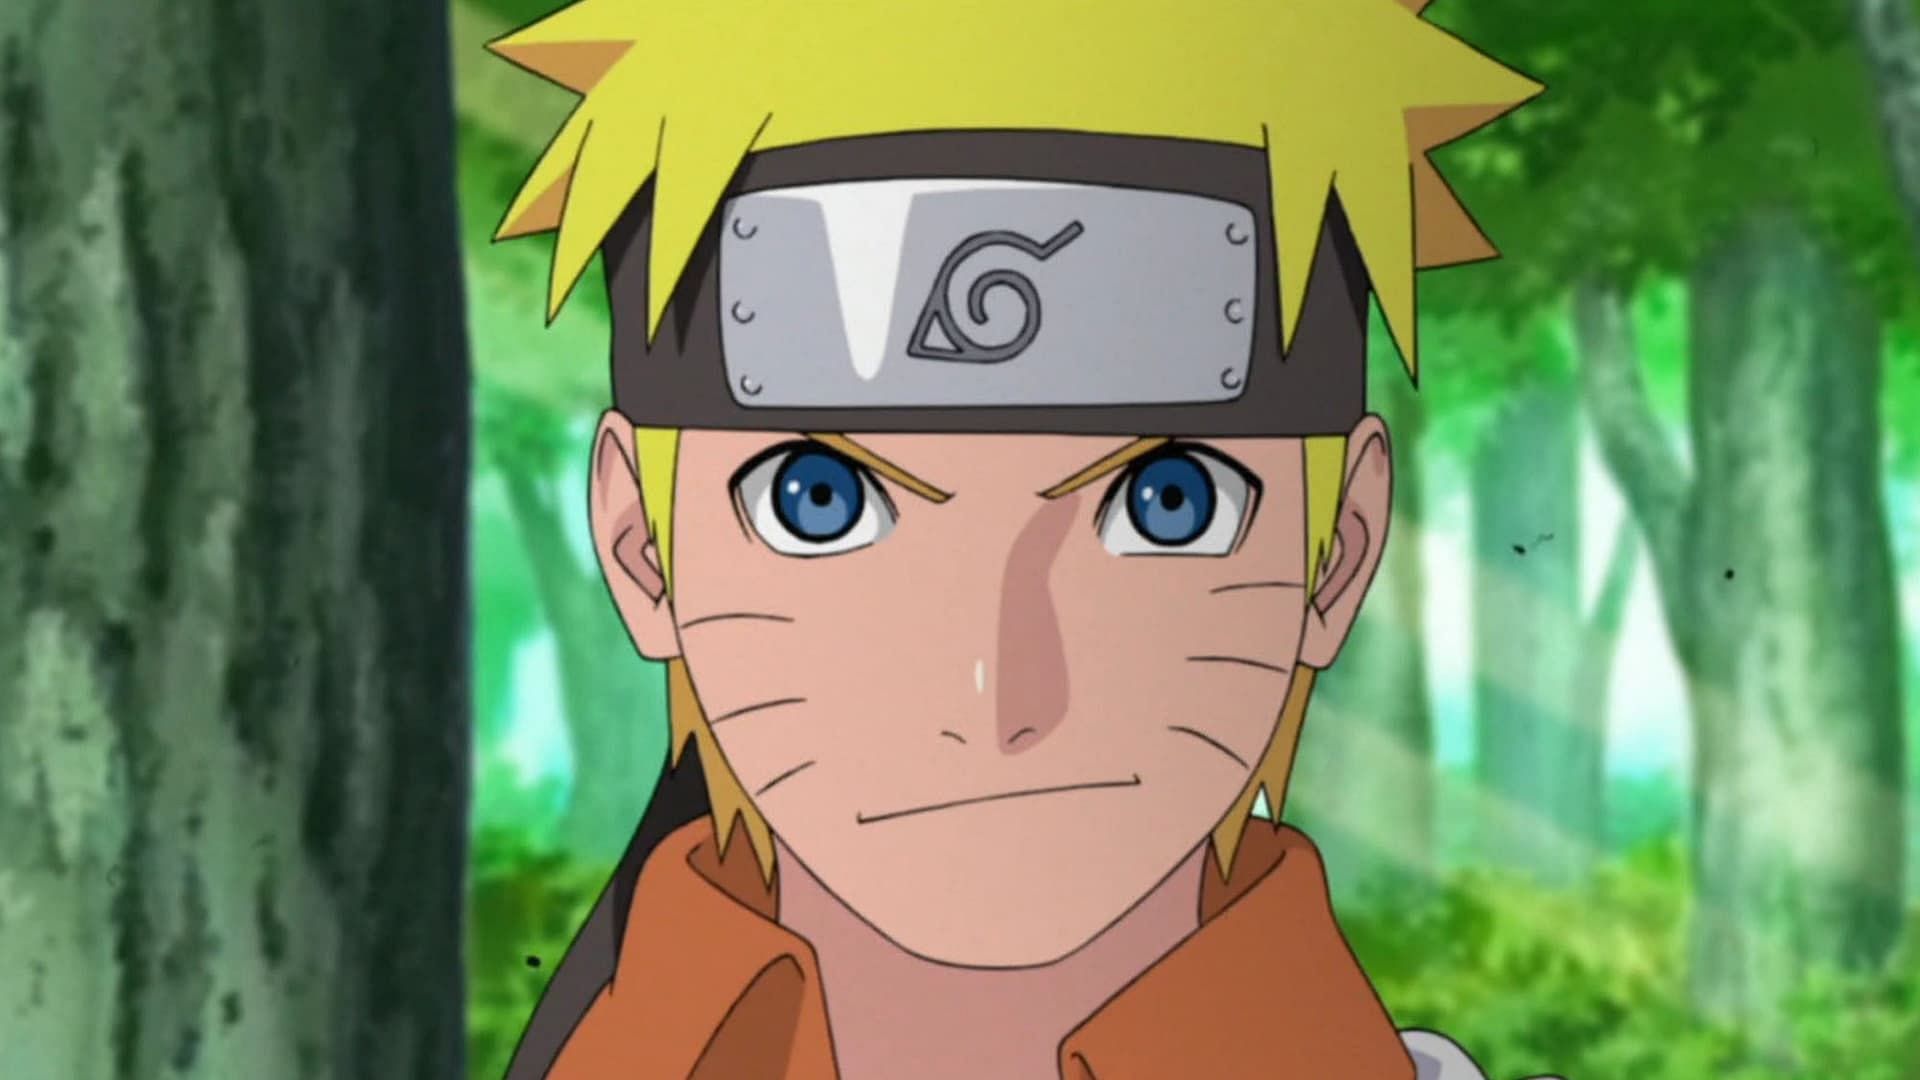 Why did Naruto never become a chunin? - Quora